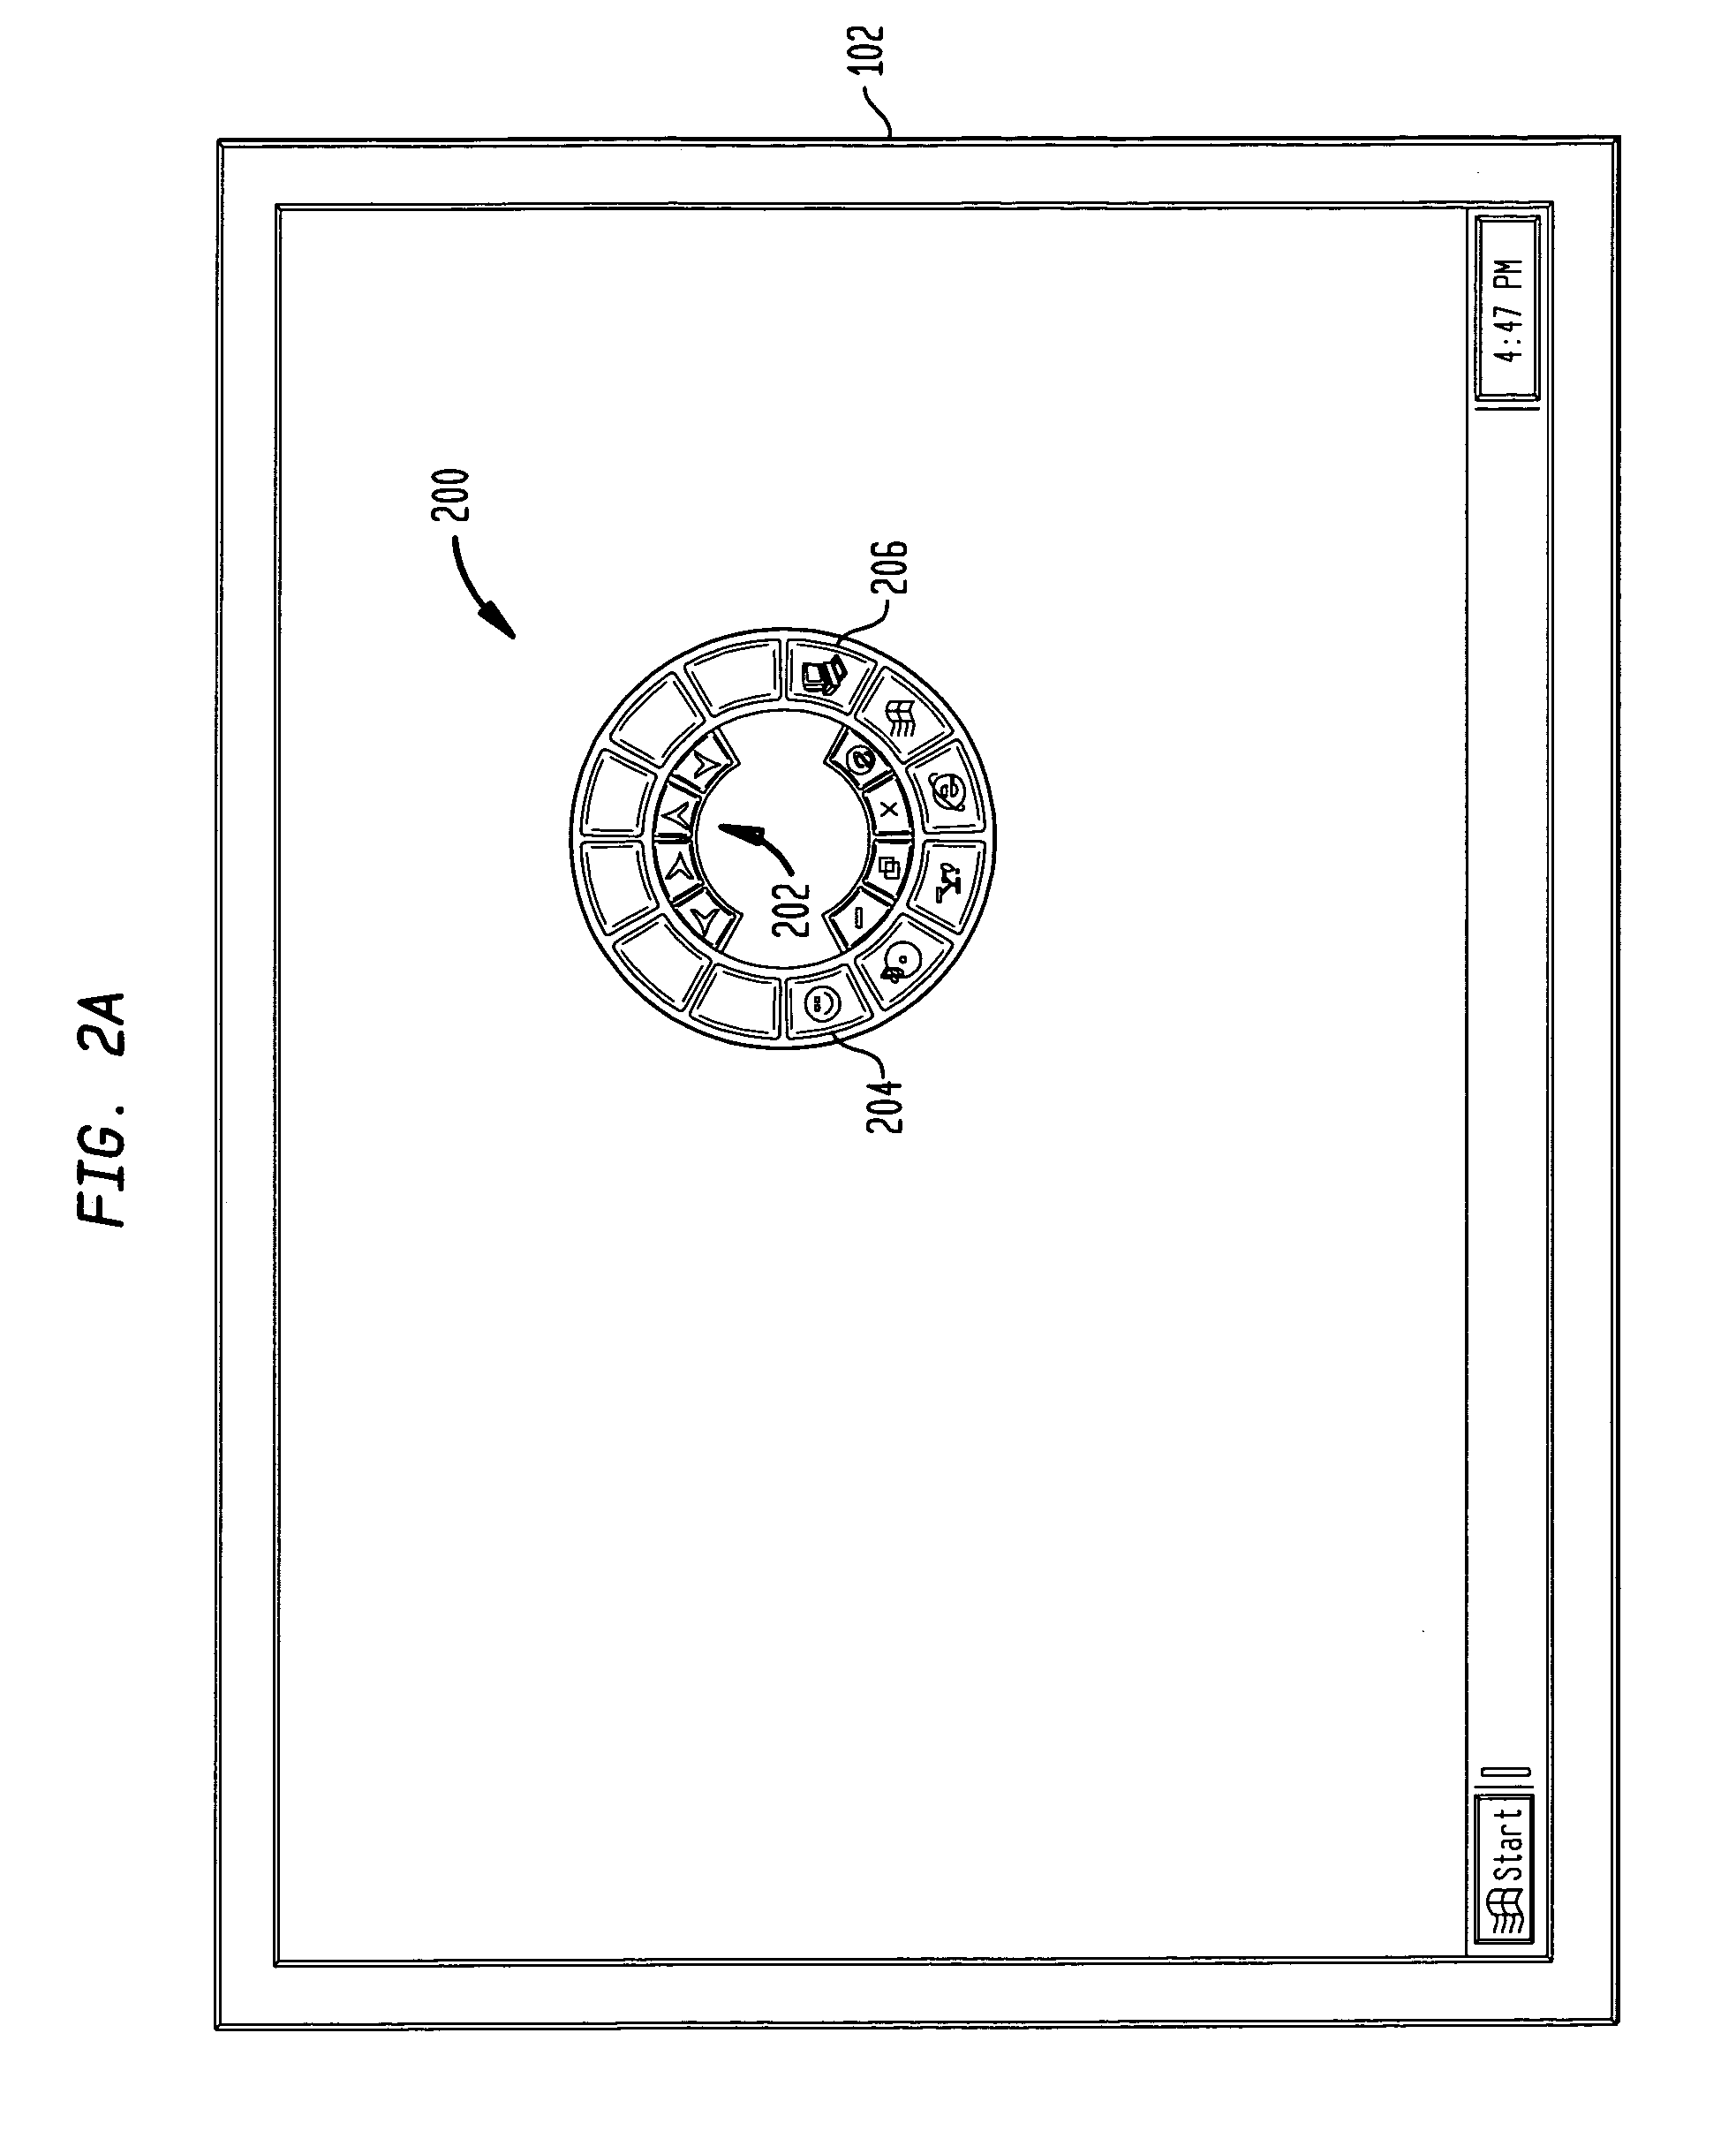 User definable interface system and method